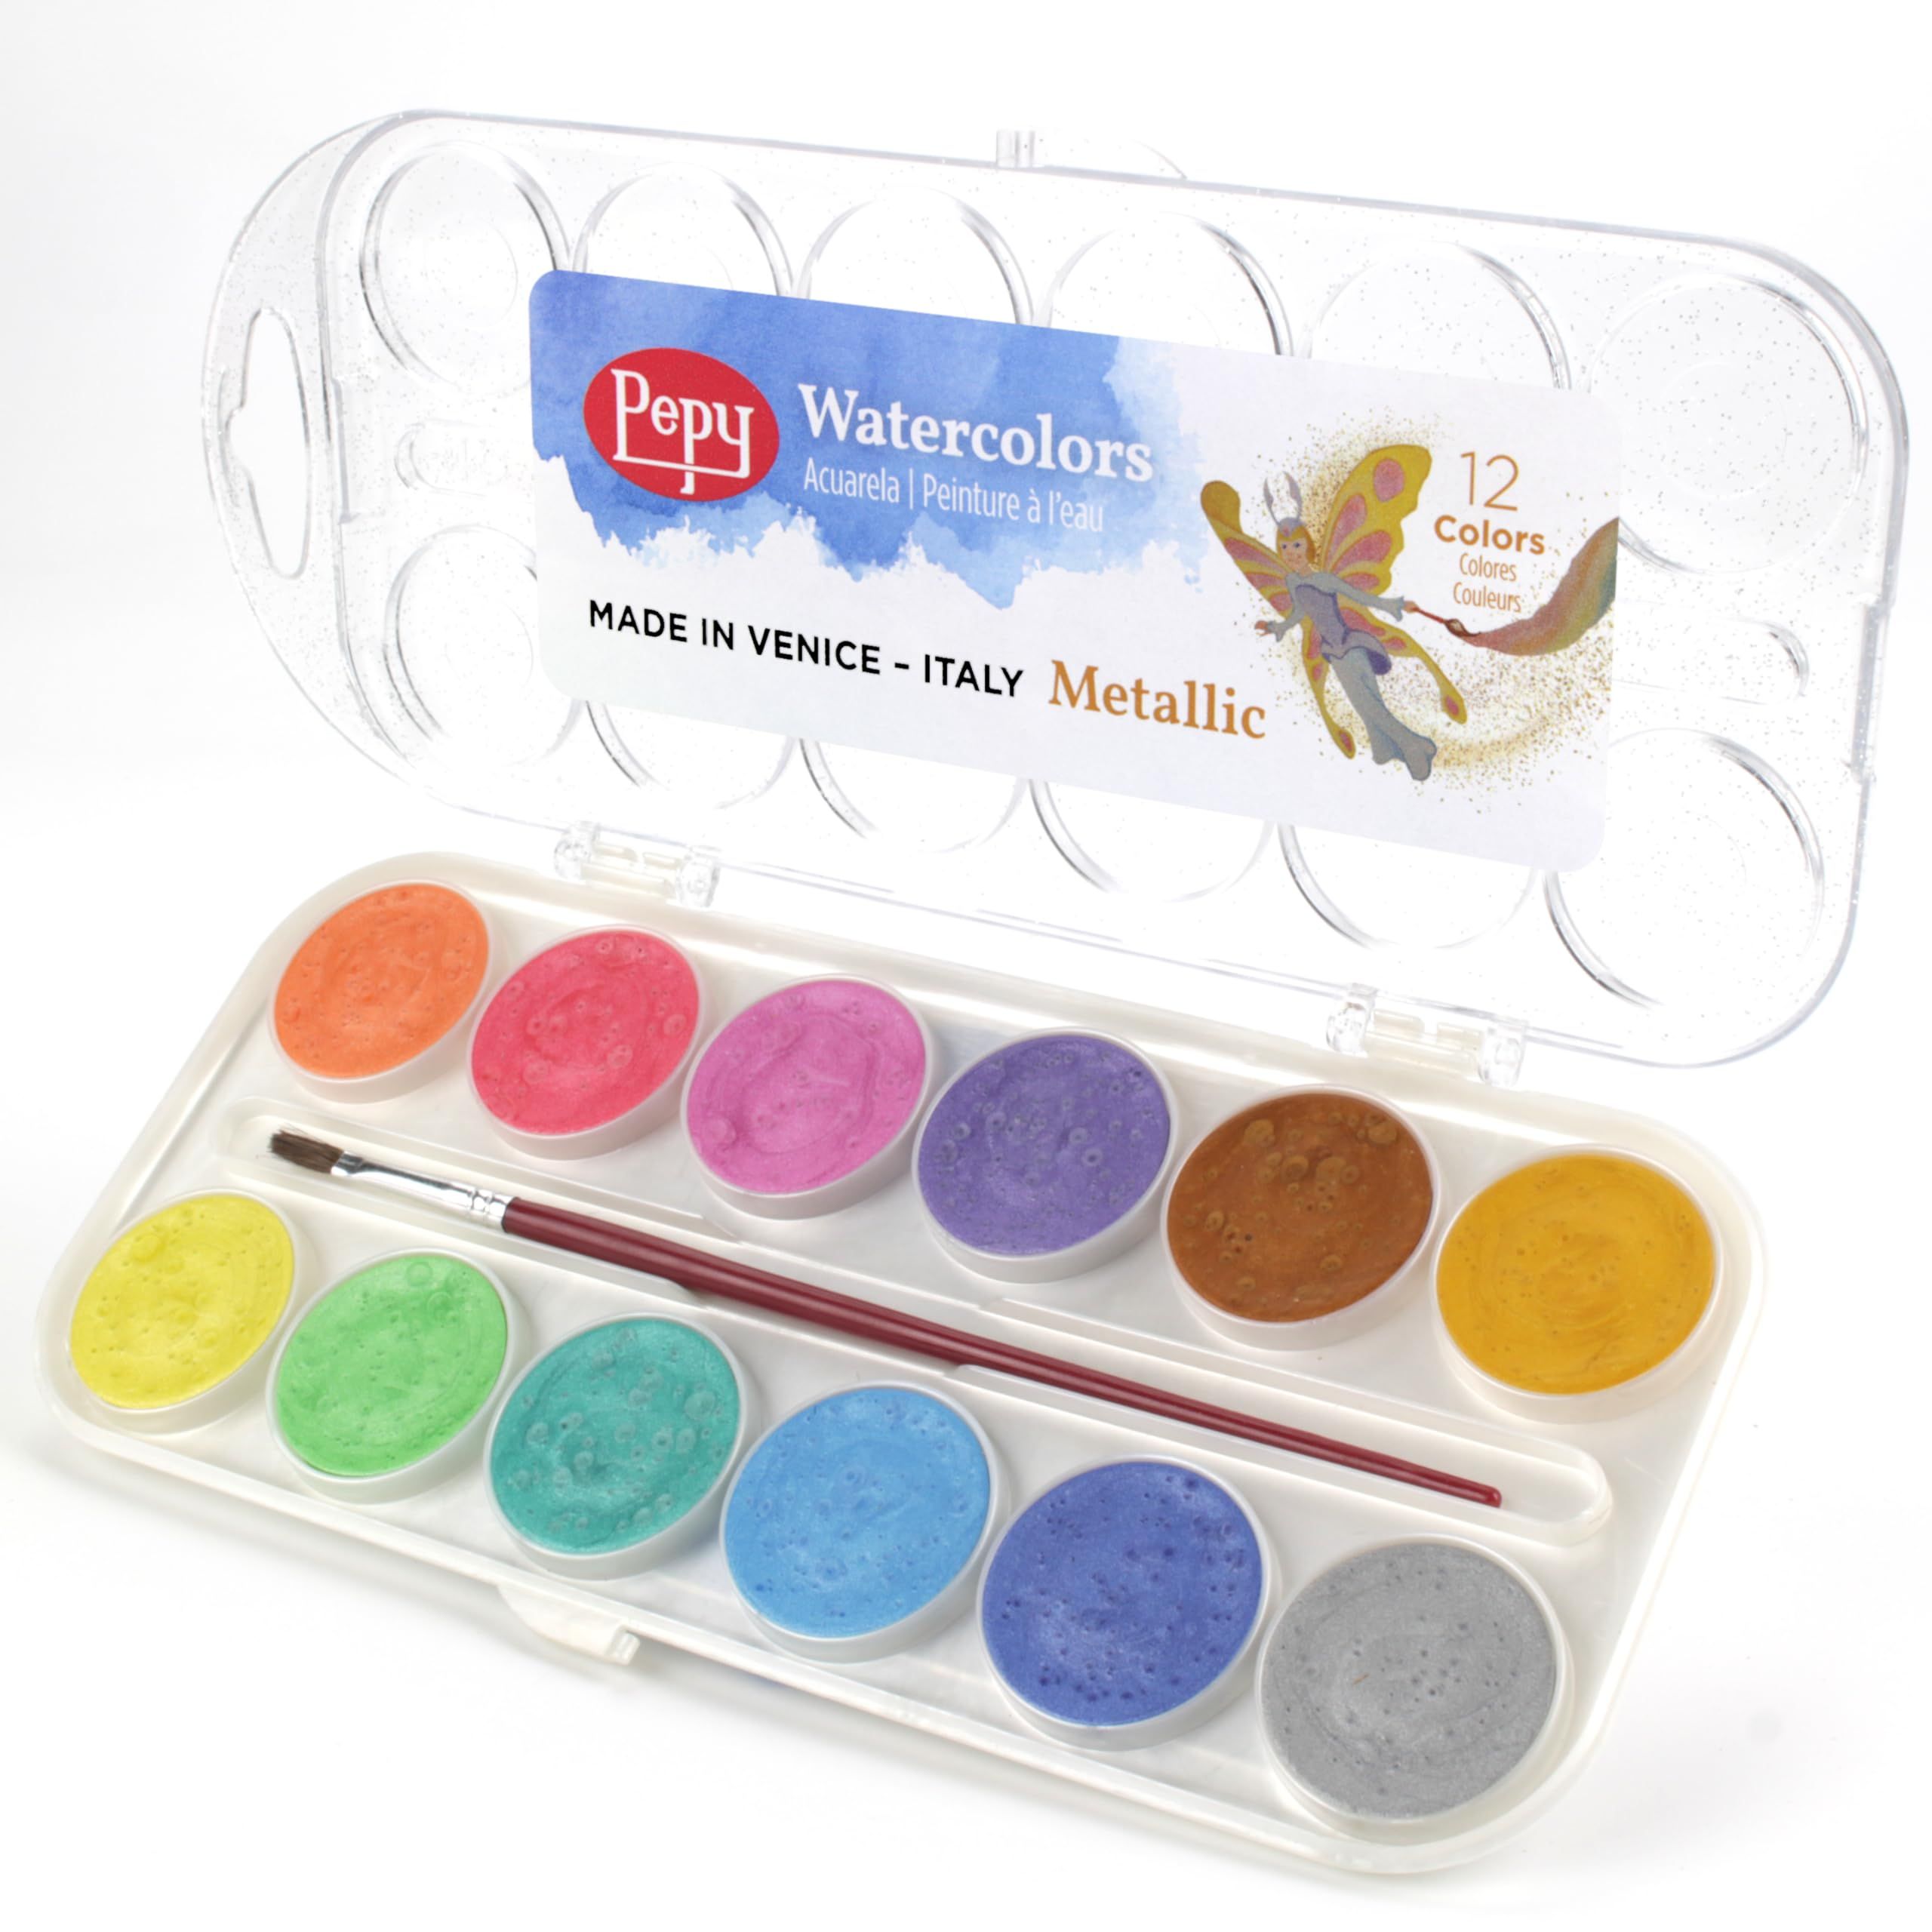 Pepy Watercolor Paint; Set of 12 Colors; Includes Brush & Closable Mixing Tray, Metallic Pearlescent Multicolor | Amazon (US)